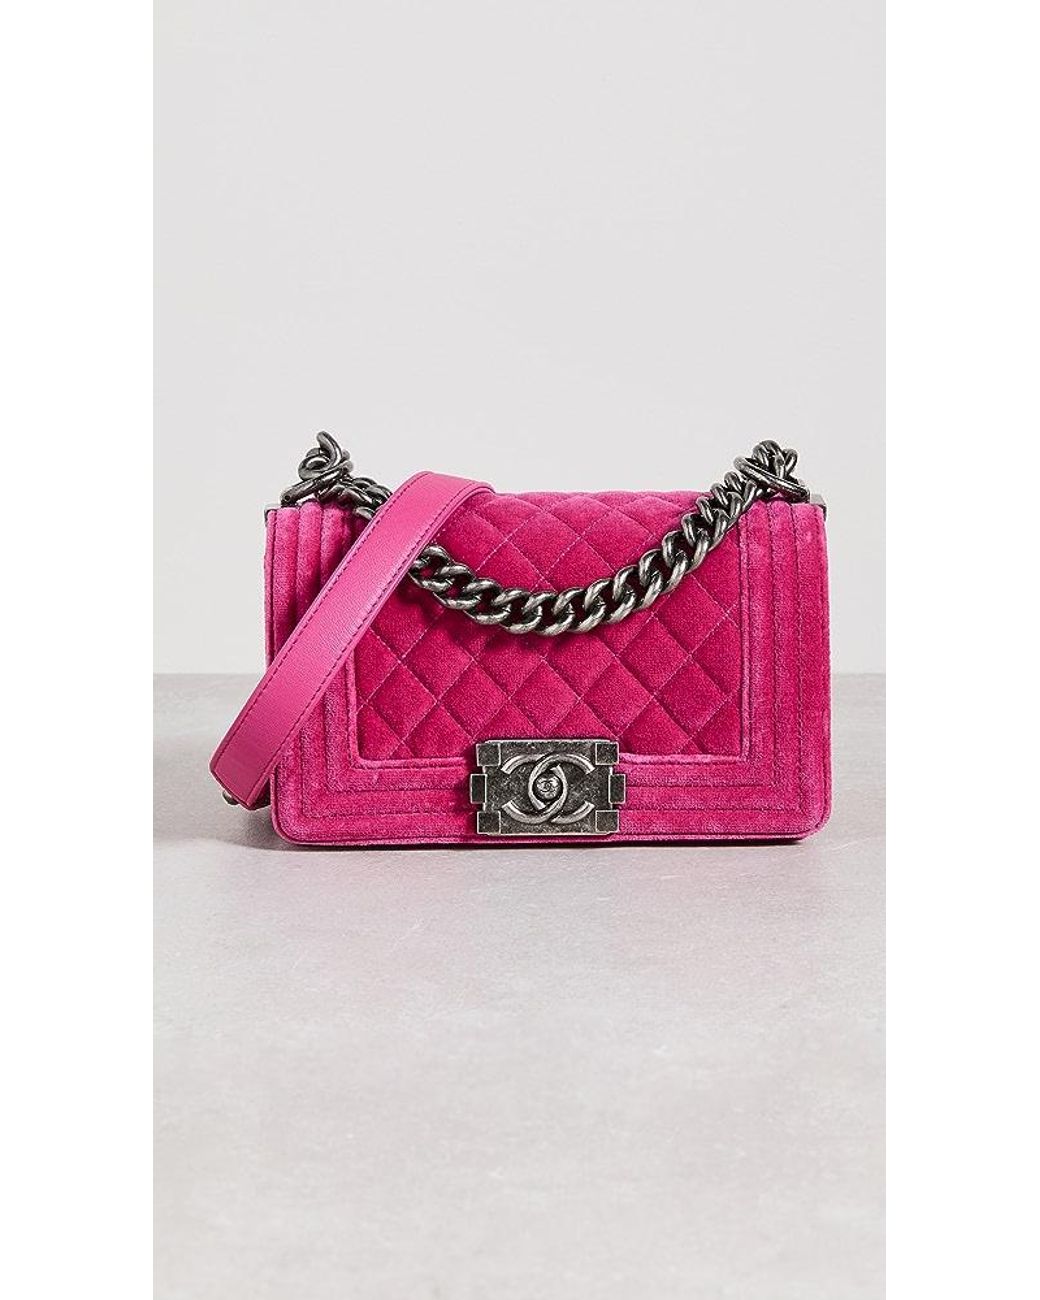 What Goes Around Comes Around Chanel Turnlock 10 Bag (Previously